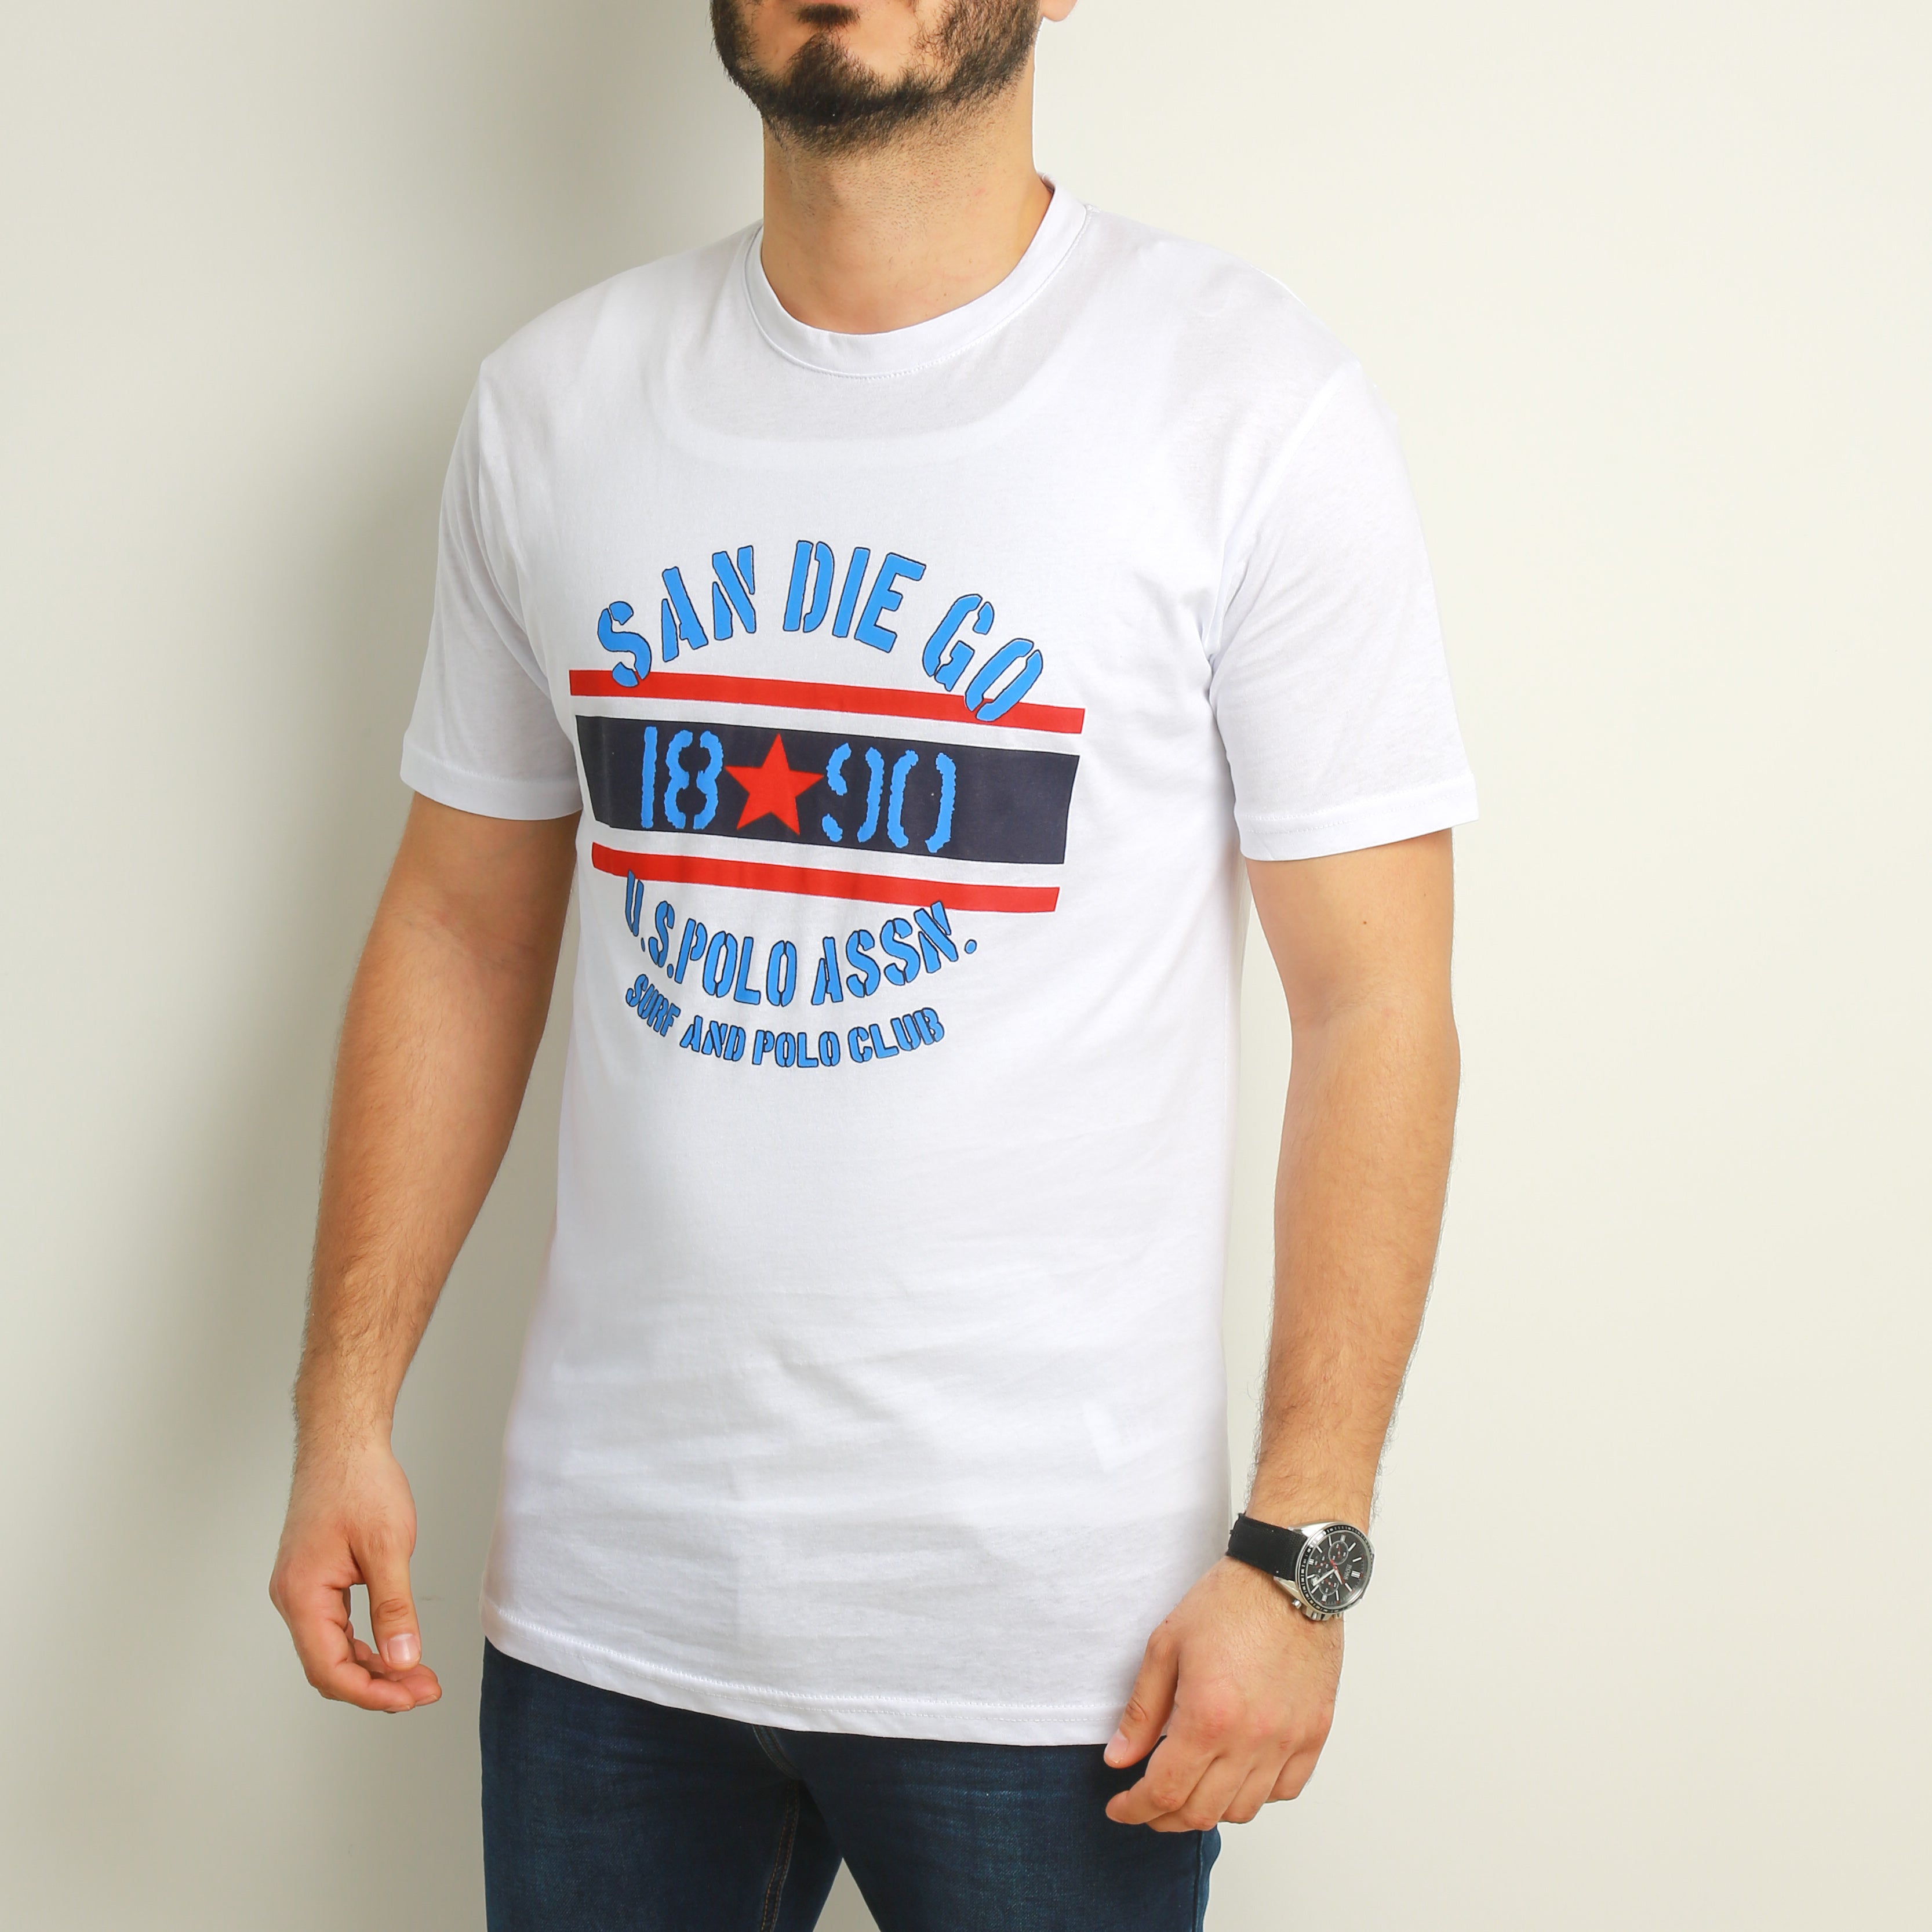 US Polo T-Shirt Homme - Blanc